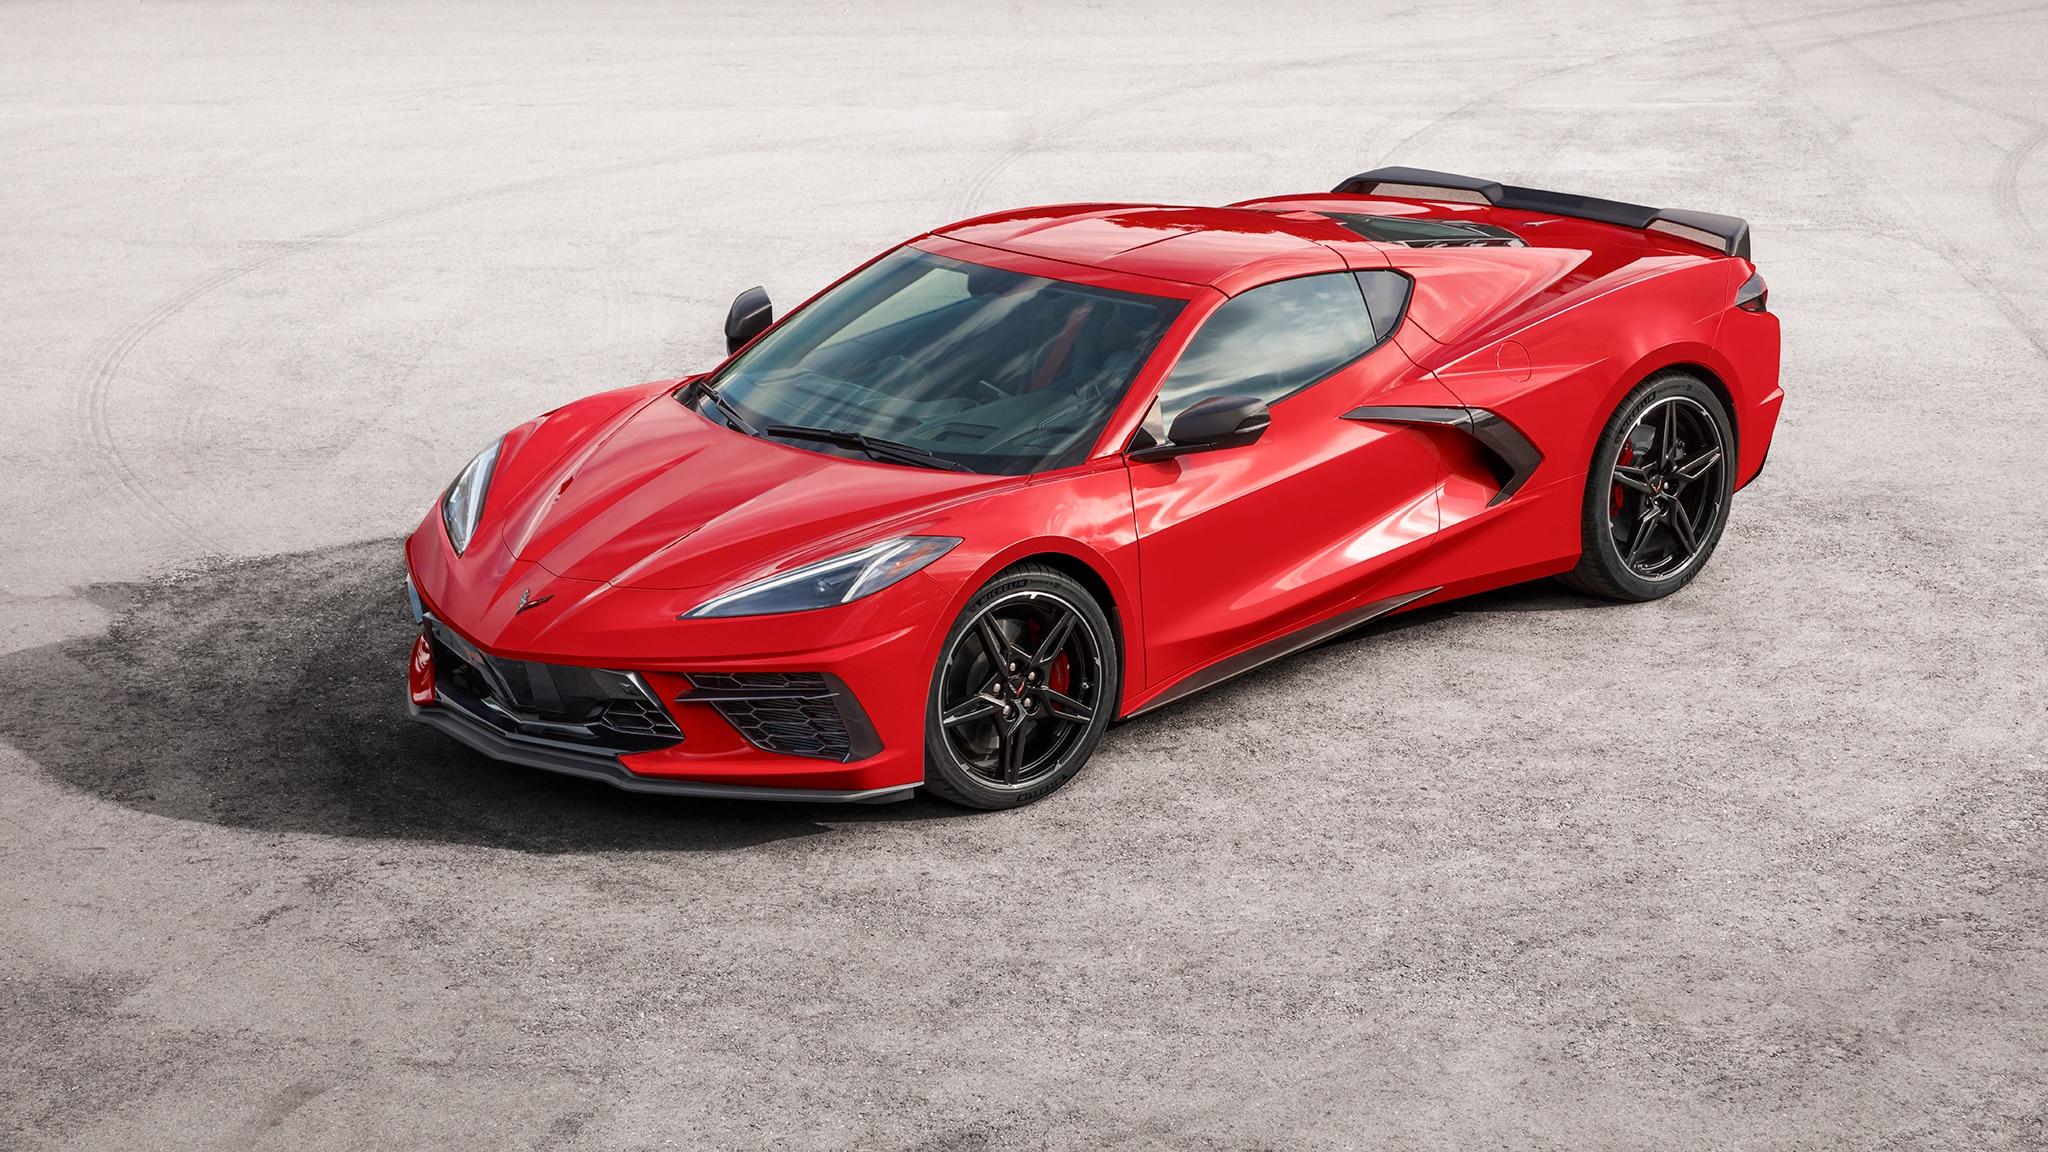 The 2020 Corvette Stingray Wins MotorTrend's Car of the Year